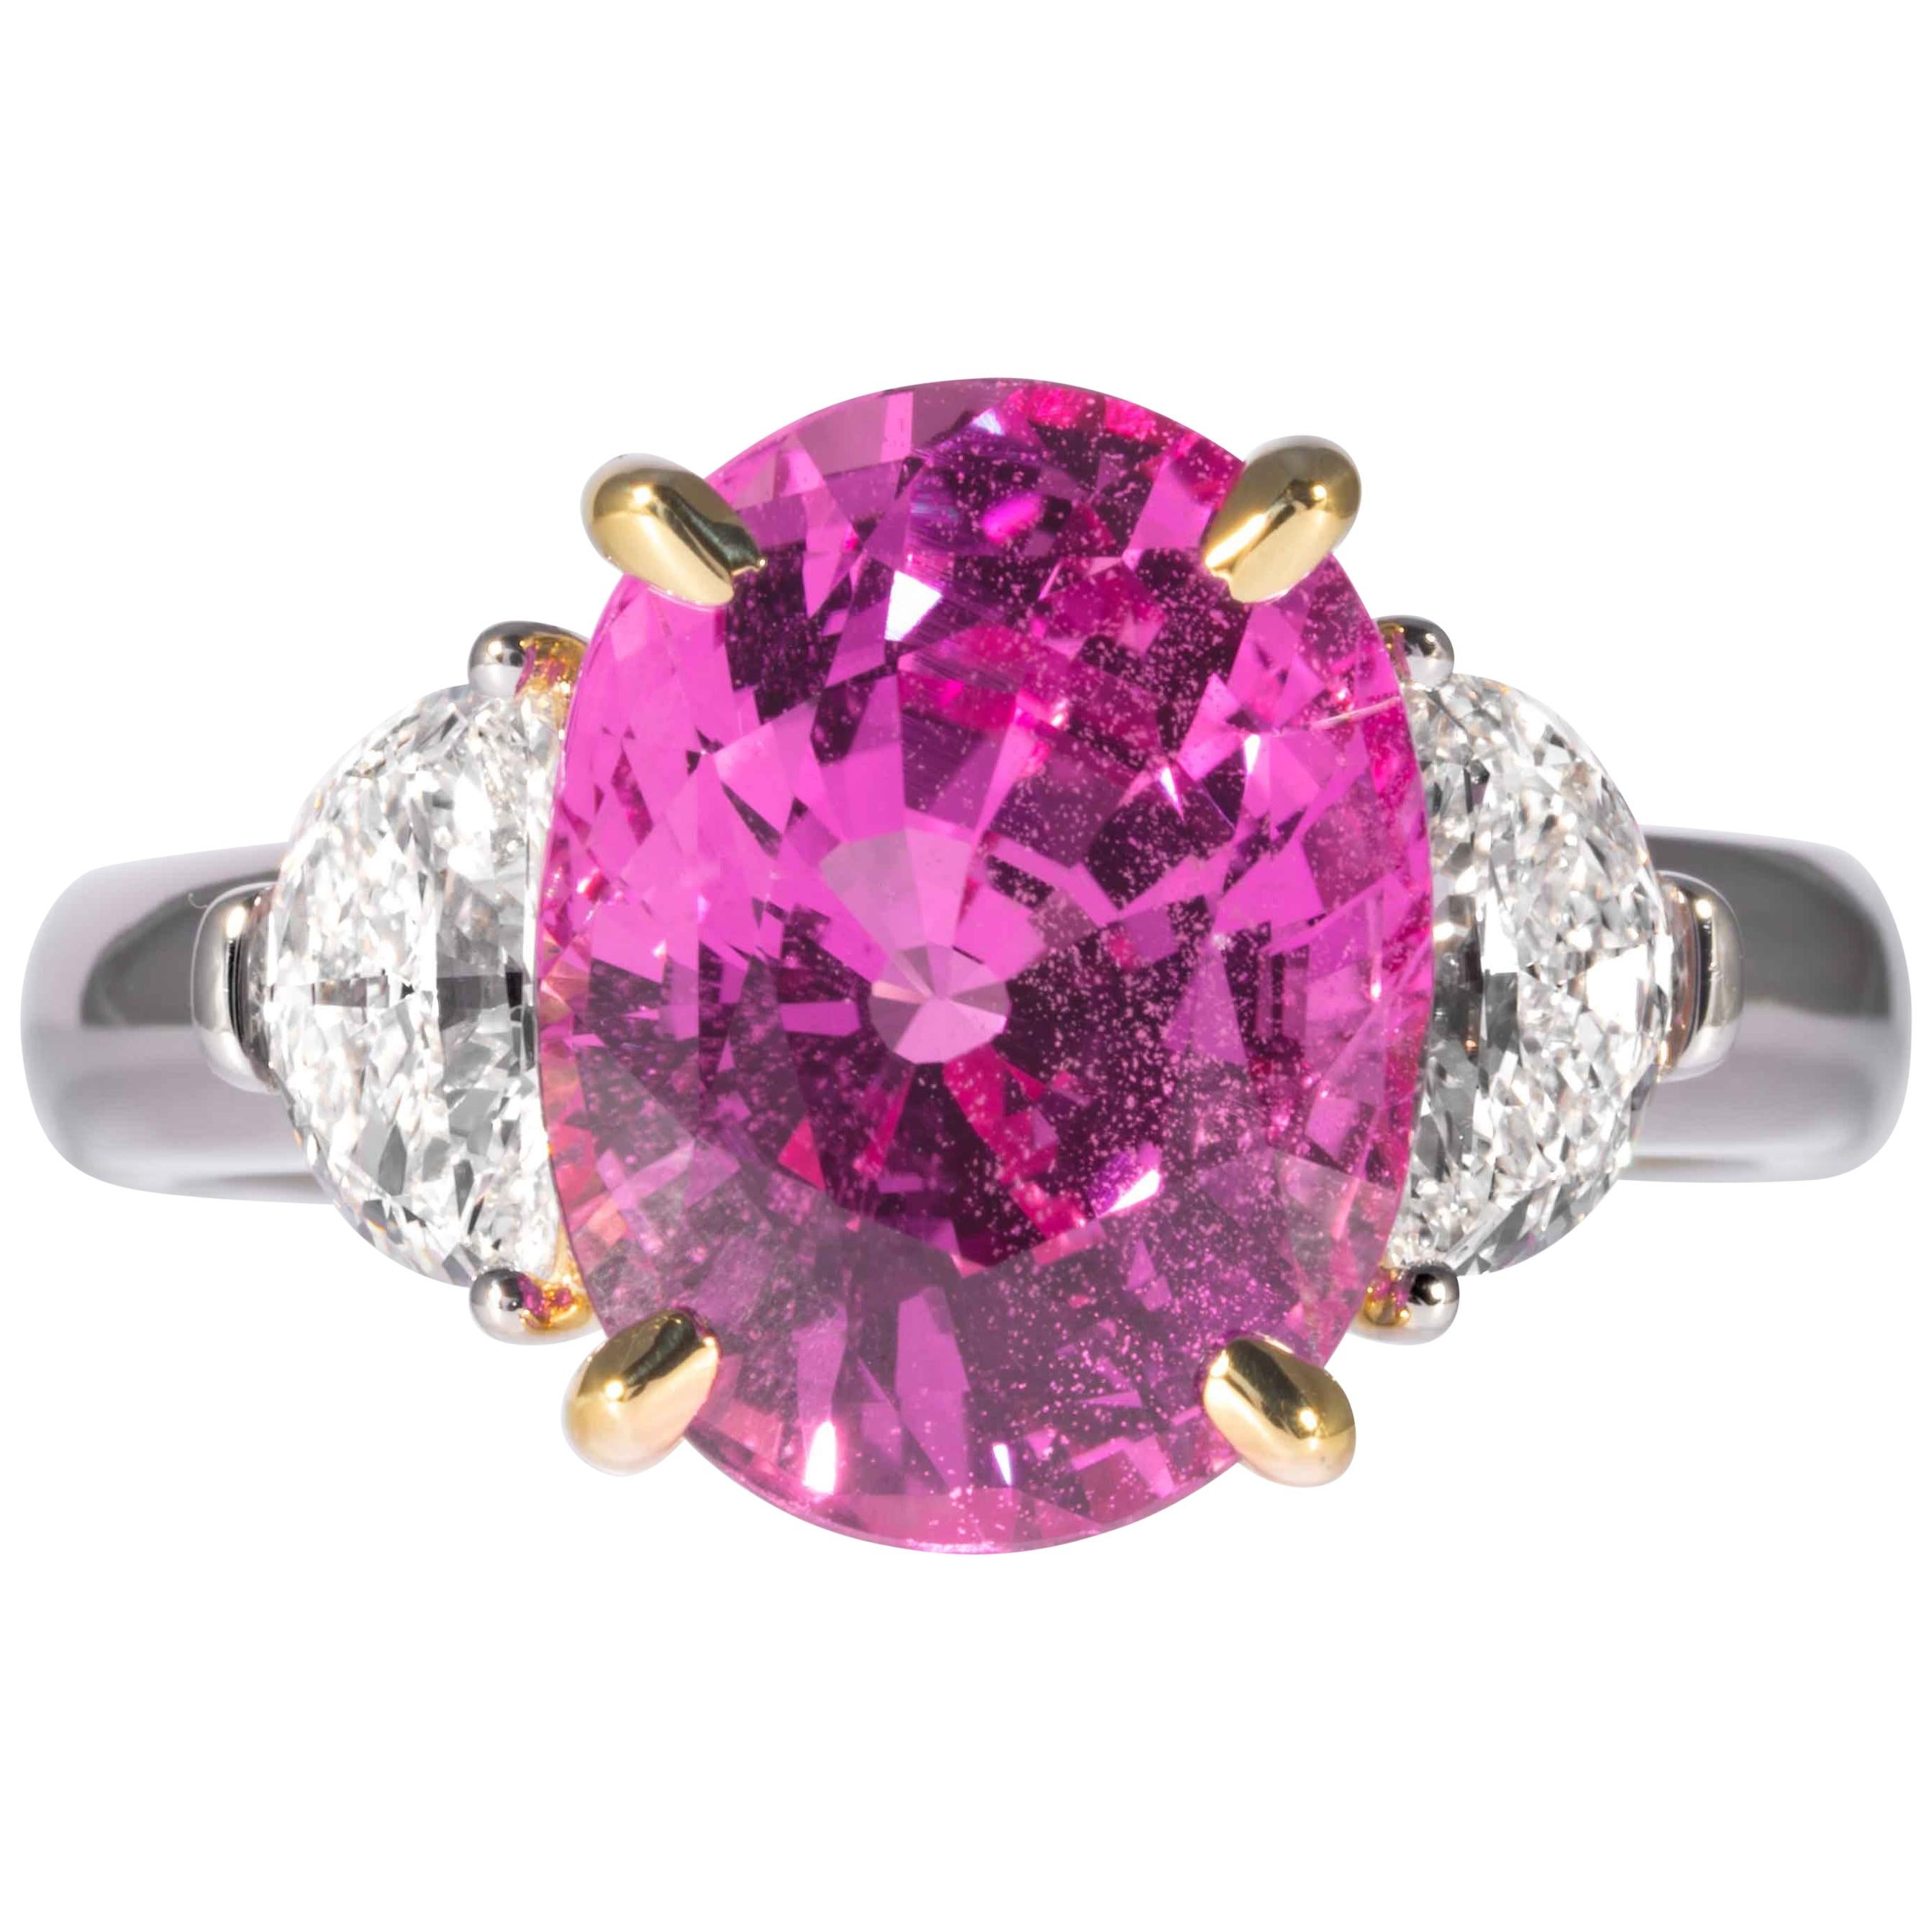 Shreve, Crump & Low 6.22 Carat Oval Cut Pink Sapphire and Diamond 3-Stone Ring For Sale